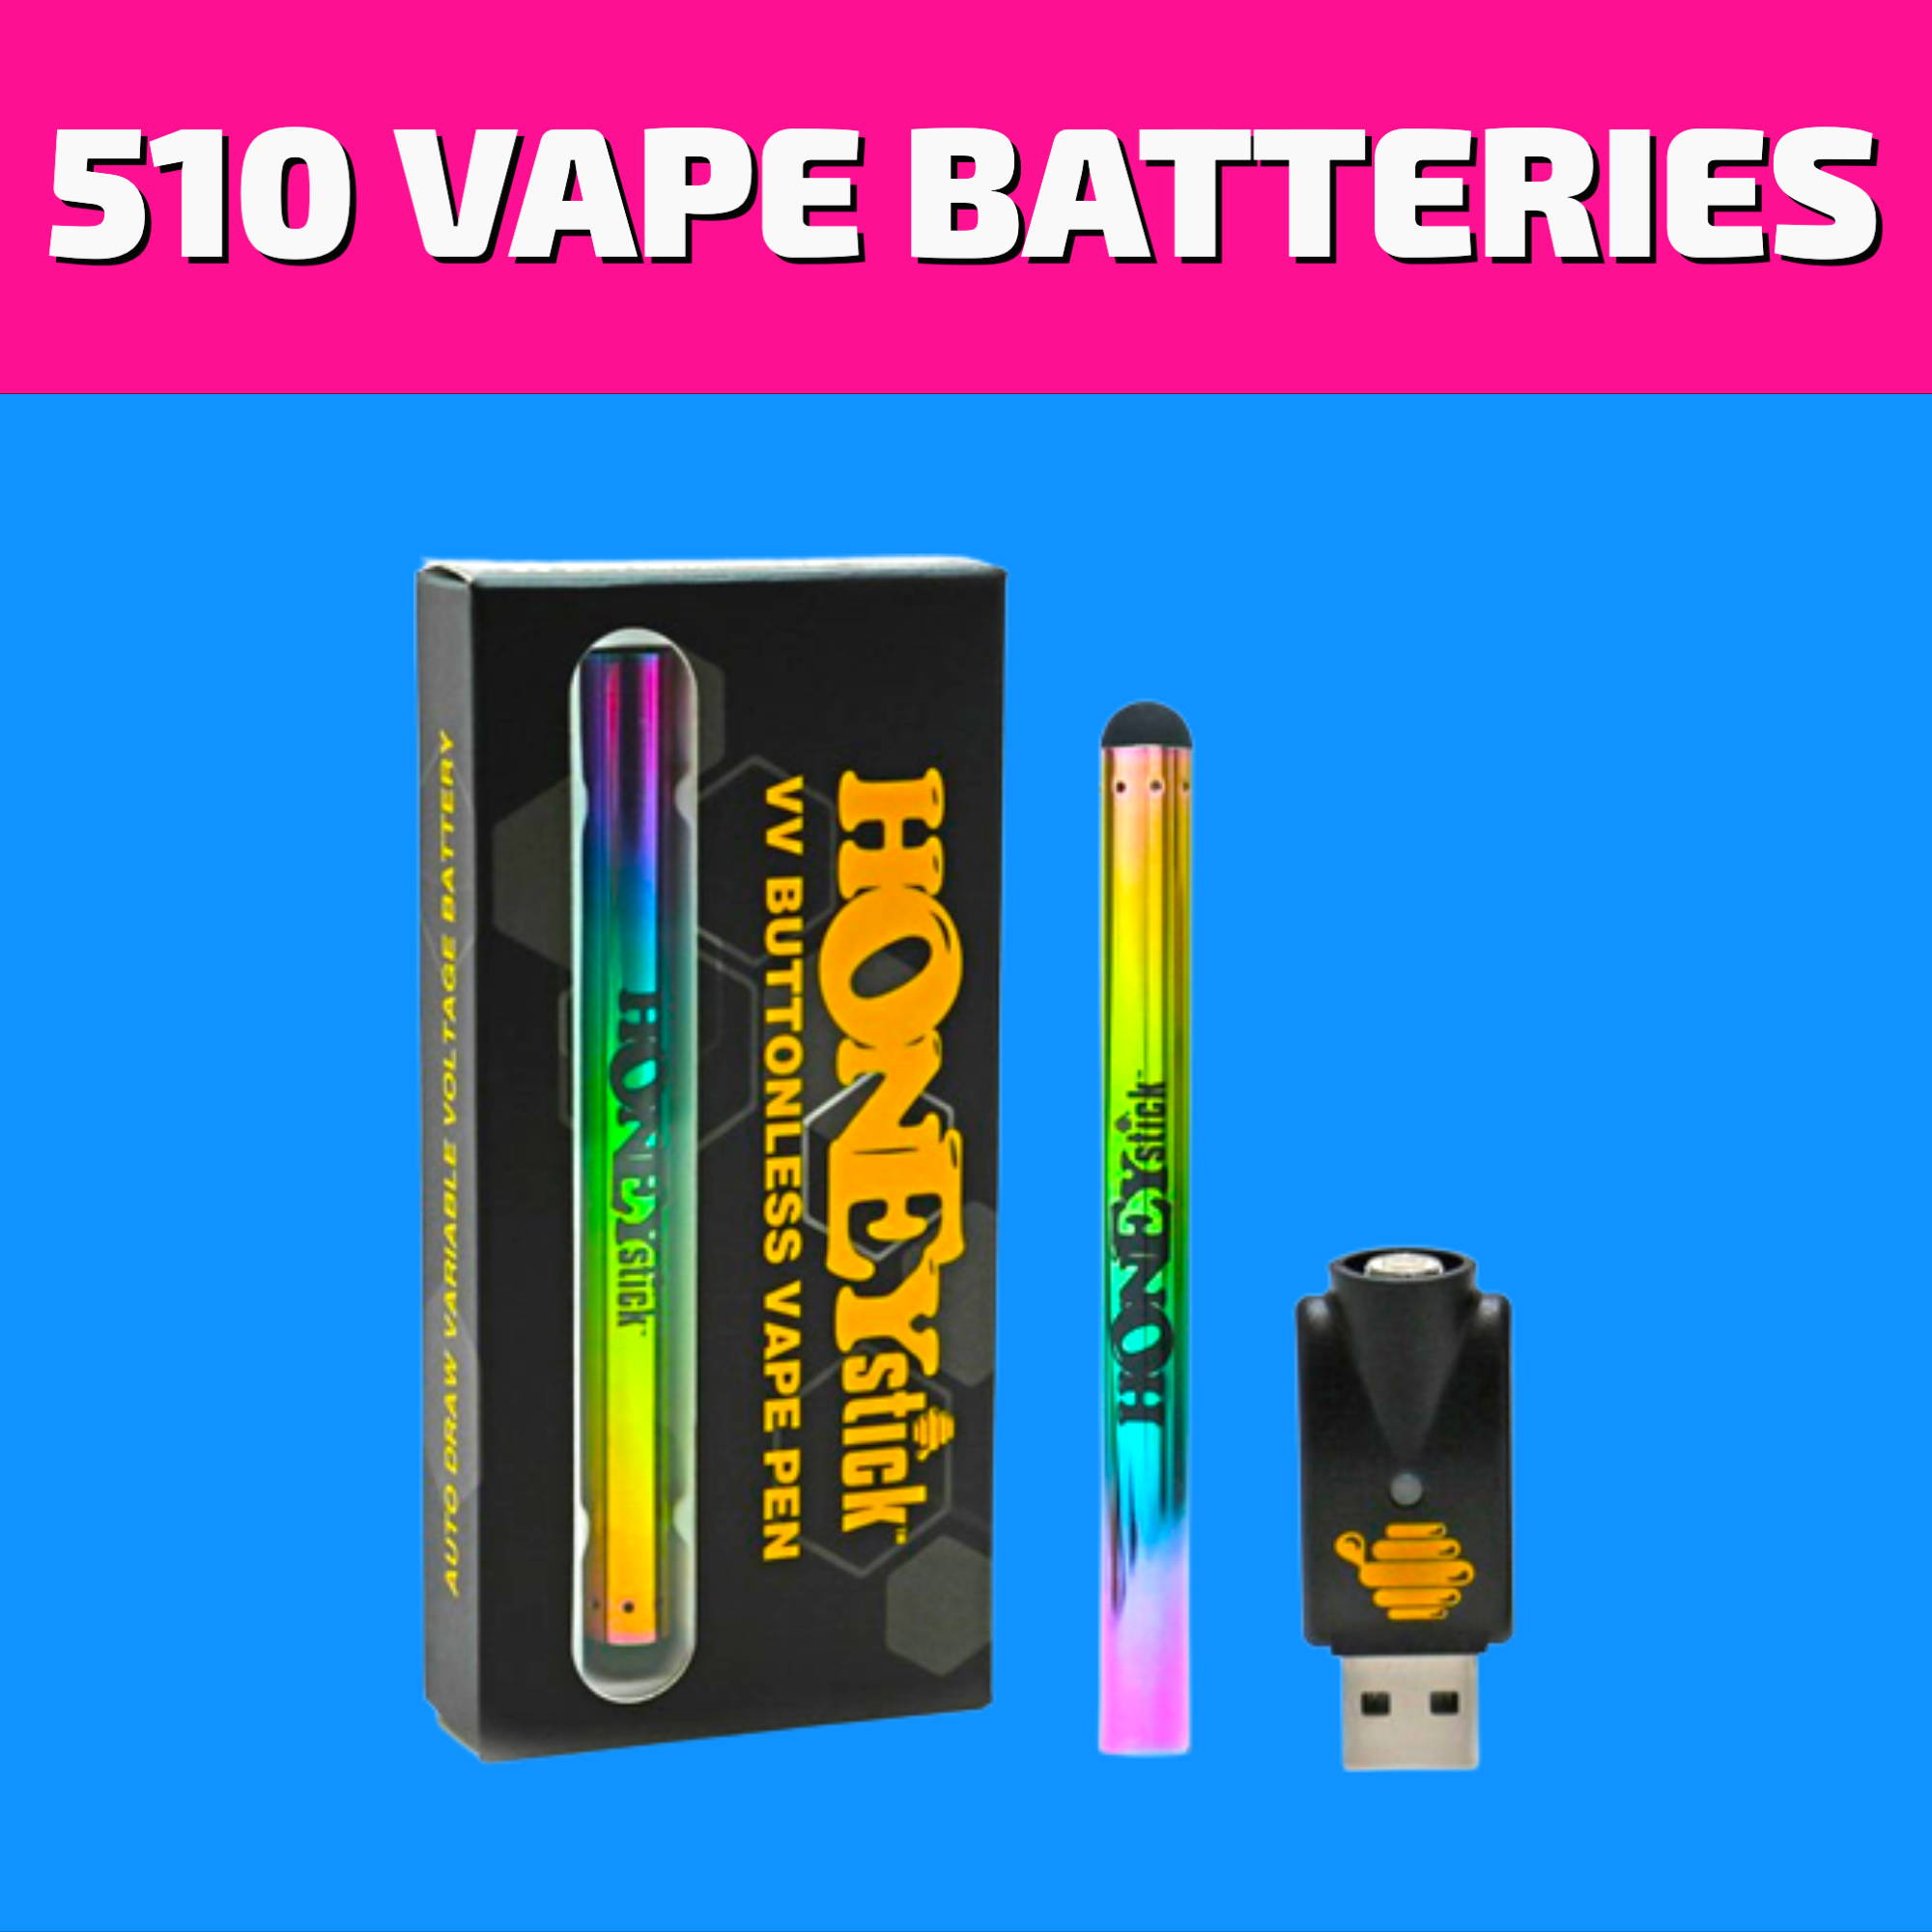 Shop the best selection of 510 Vape Batteries, Dab Pens, and 510 Vape Carts for same day delivery in Winnipeg or visit our dispensary on 580 Academy Road.  